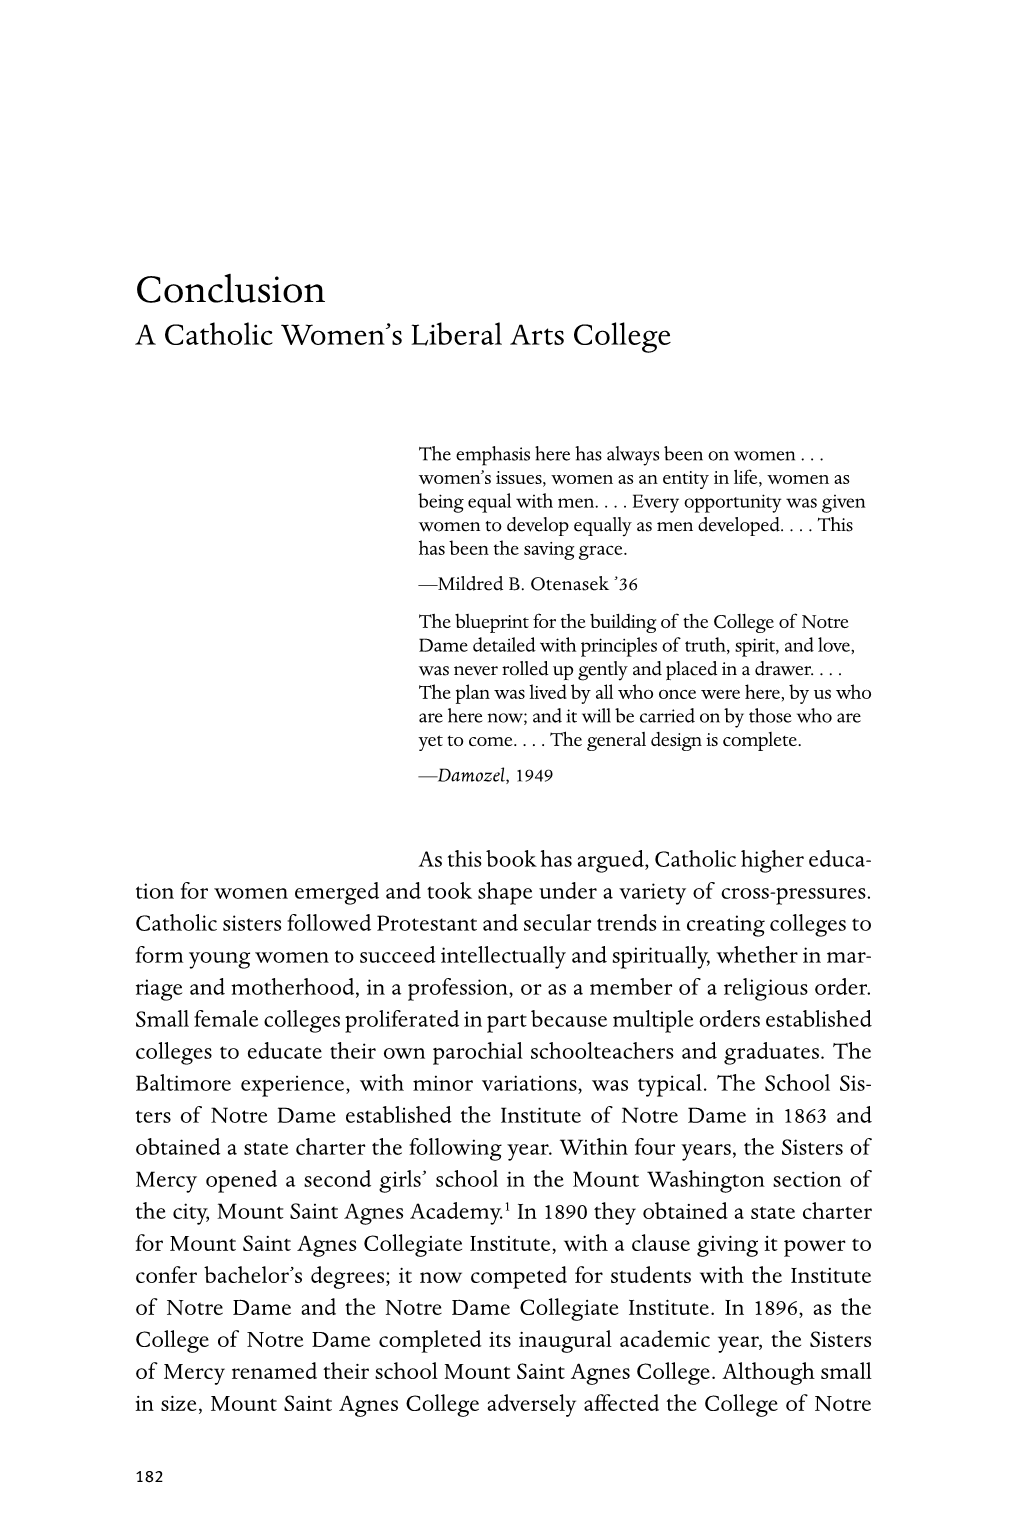 Conclusion a Catholic Women's Liberal Arts College